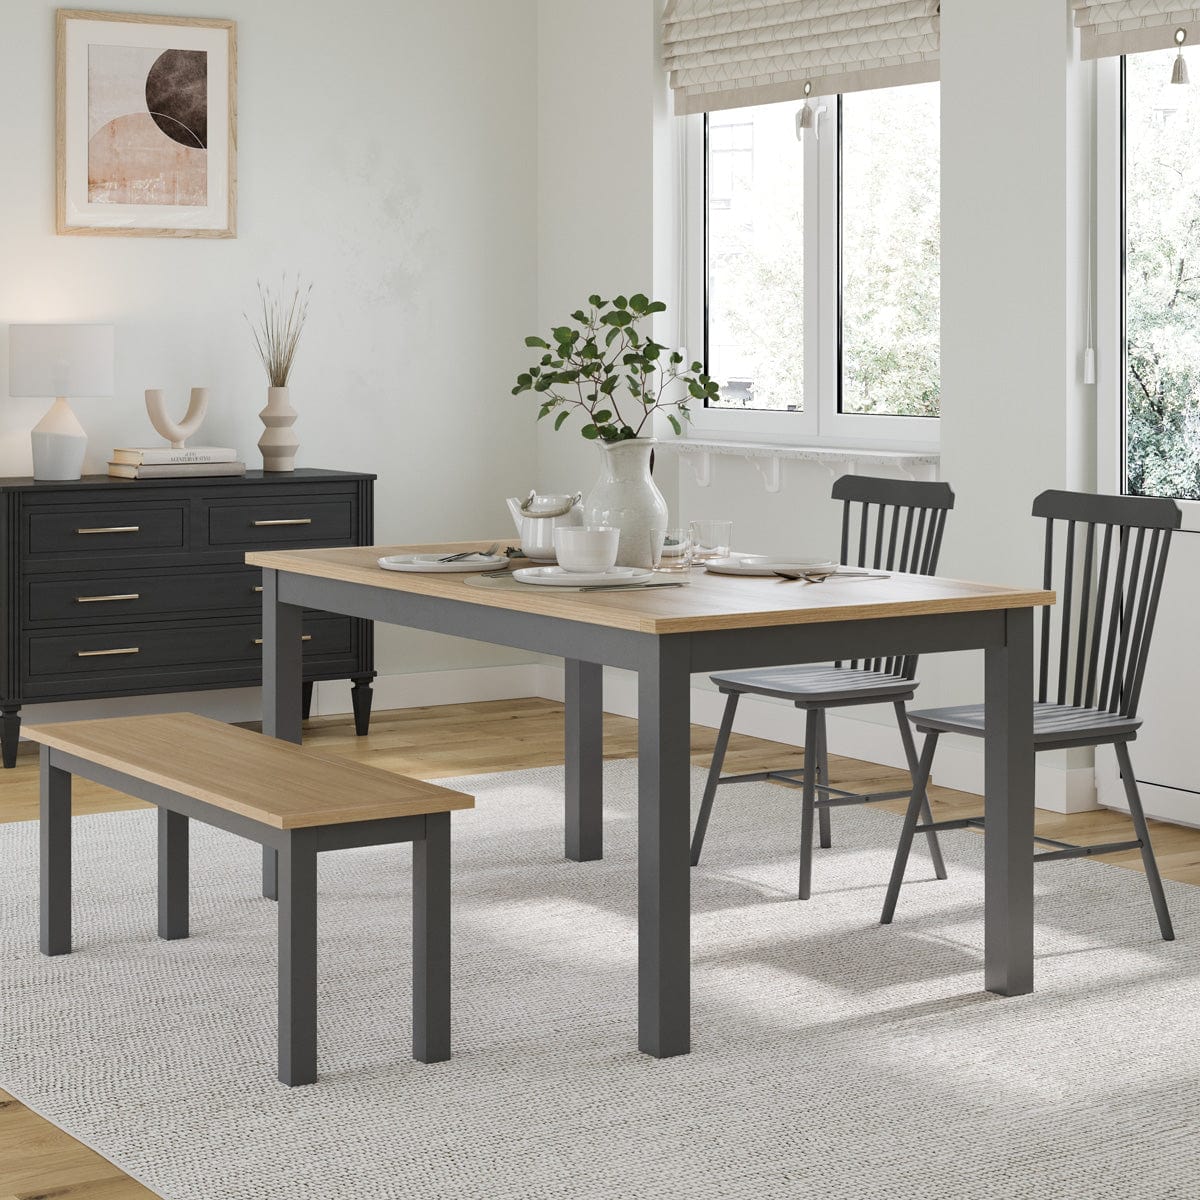 Alice 4-6 Seater Dining Table - Oak/Charcoal - DUSK